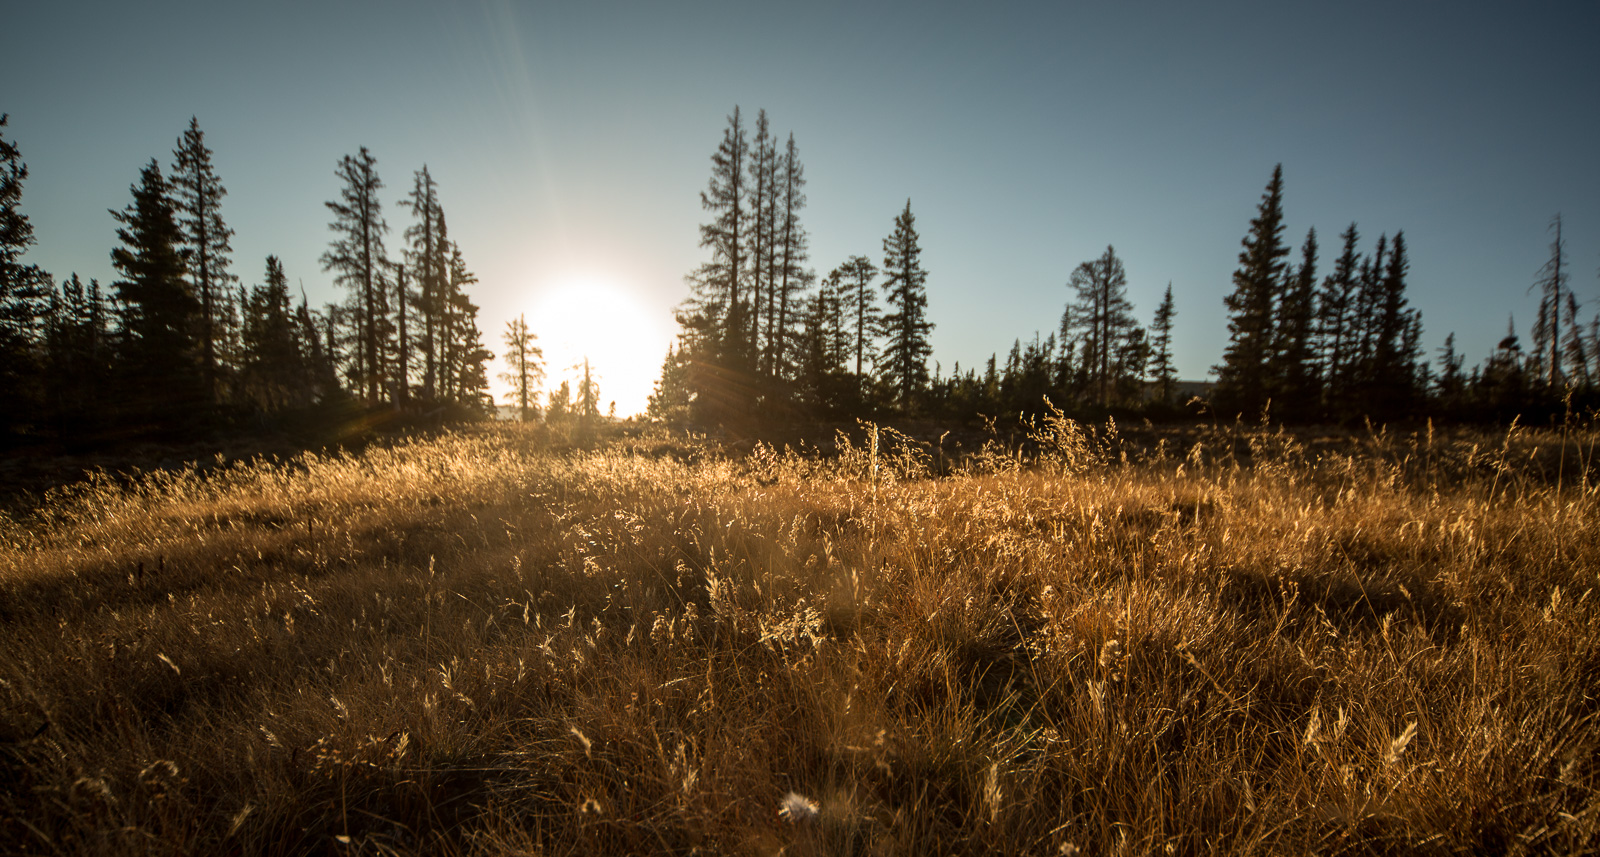 Sun hits the dying grass on Bald Mountain Pass, just off Highway 150, Uintah National Forest, Utah. September, 2015.